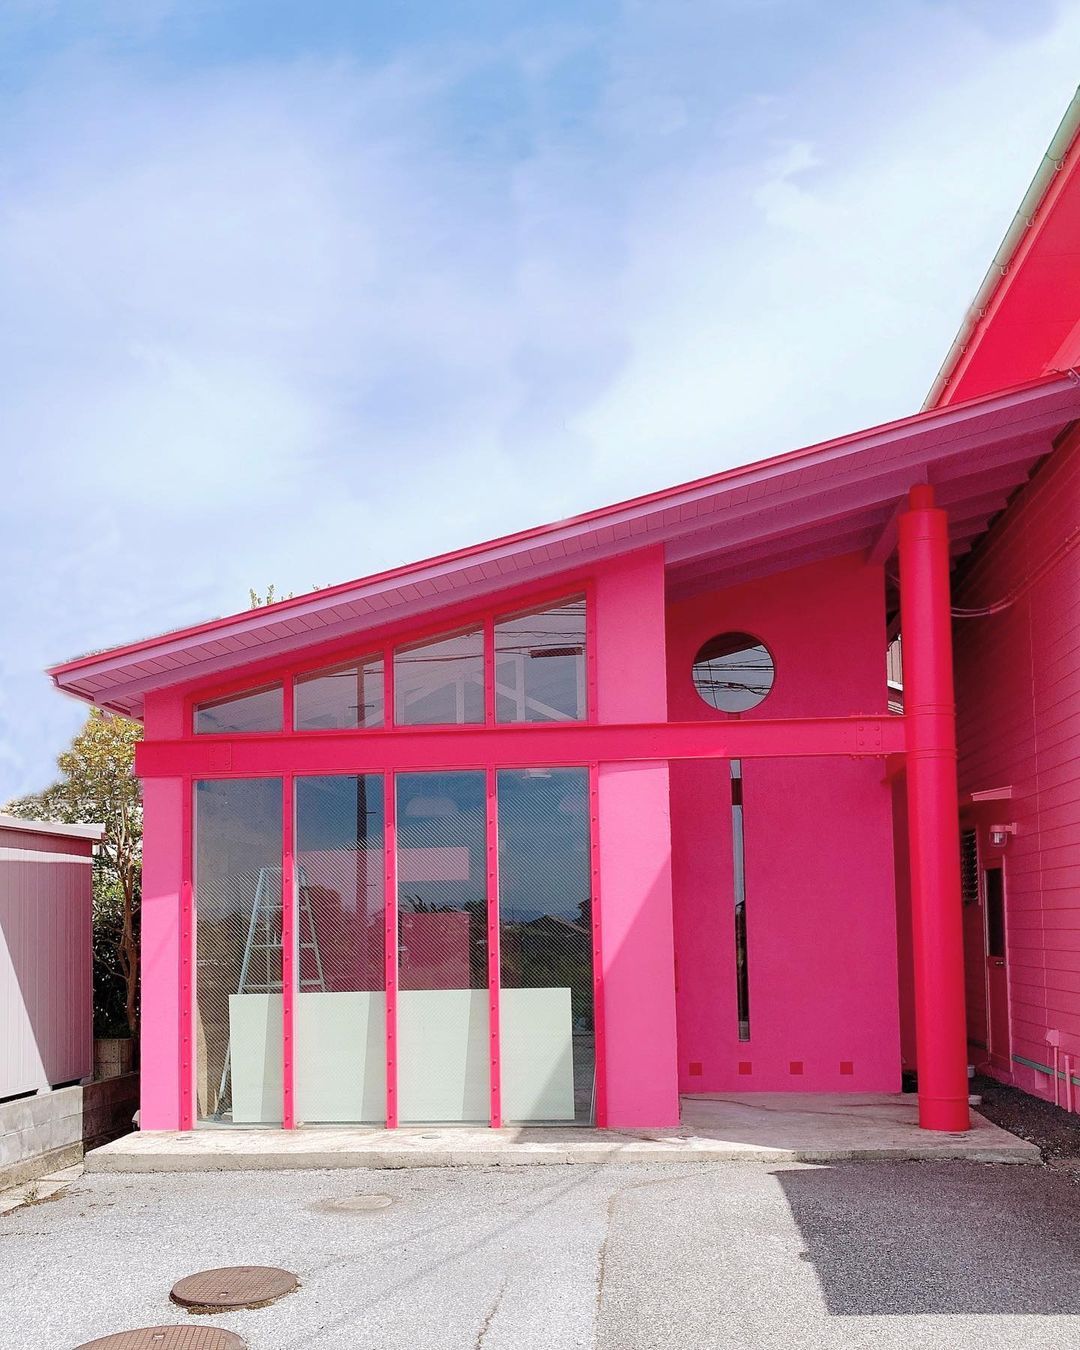 Fluorescent Pink House with Slanted Roof in Shiga Japan via @namikomori